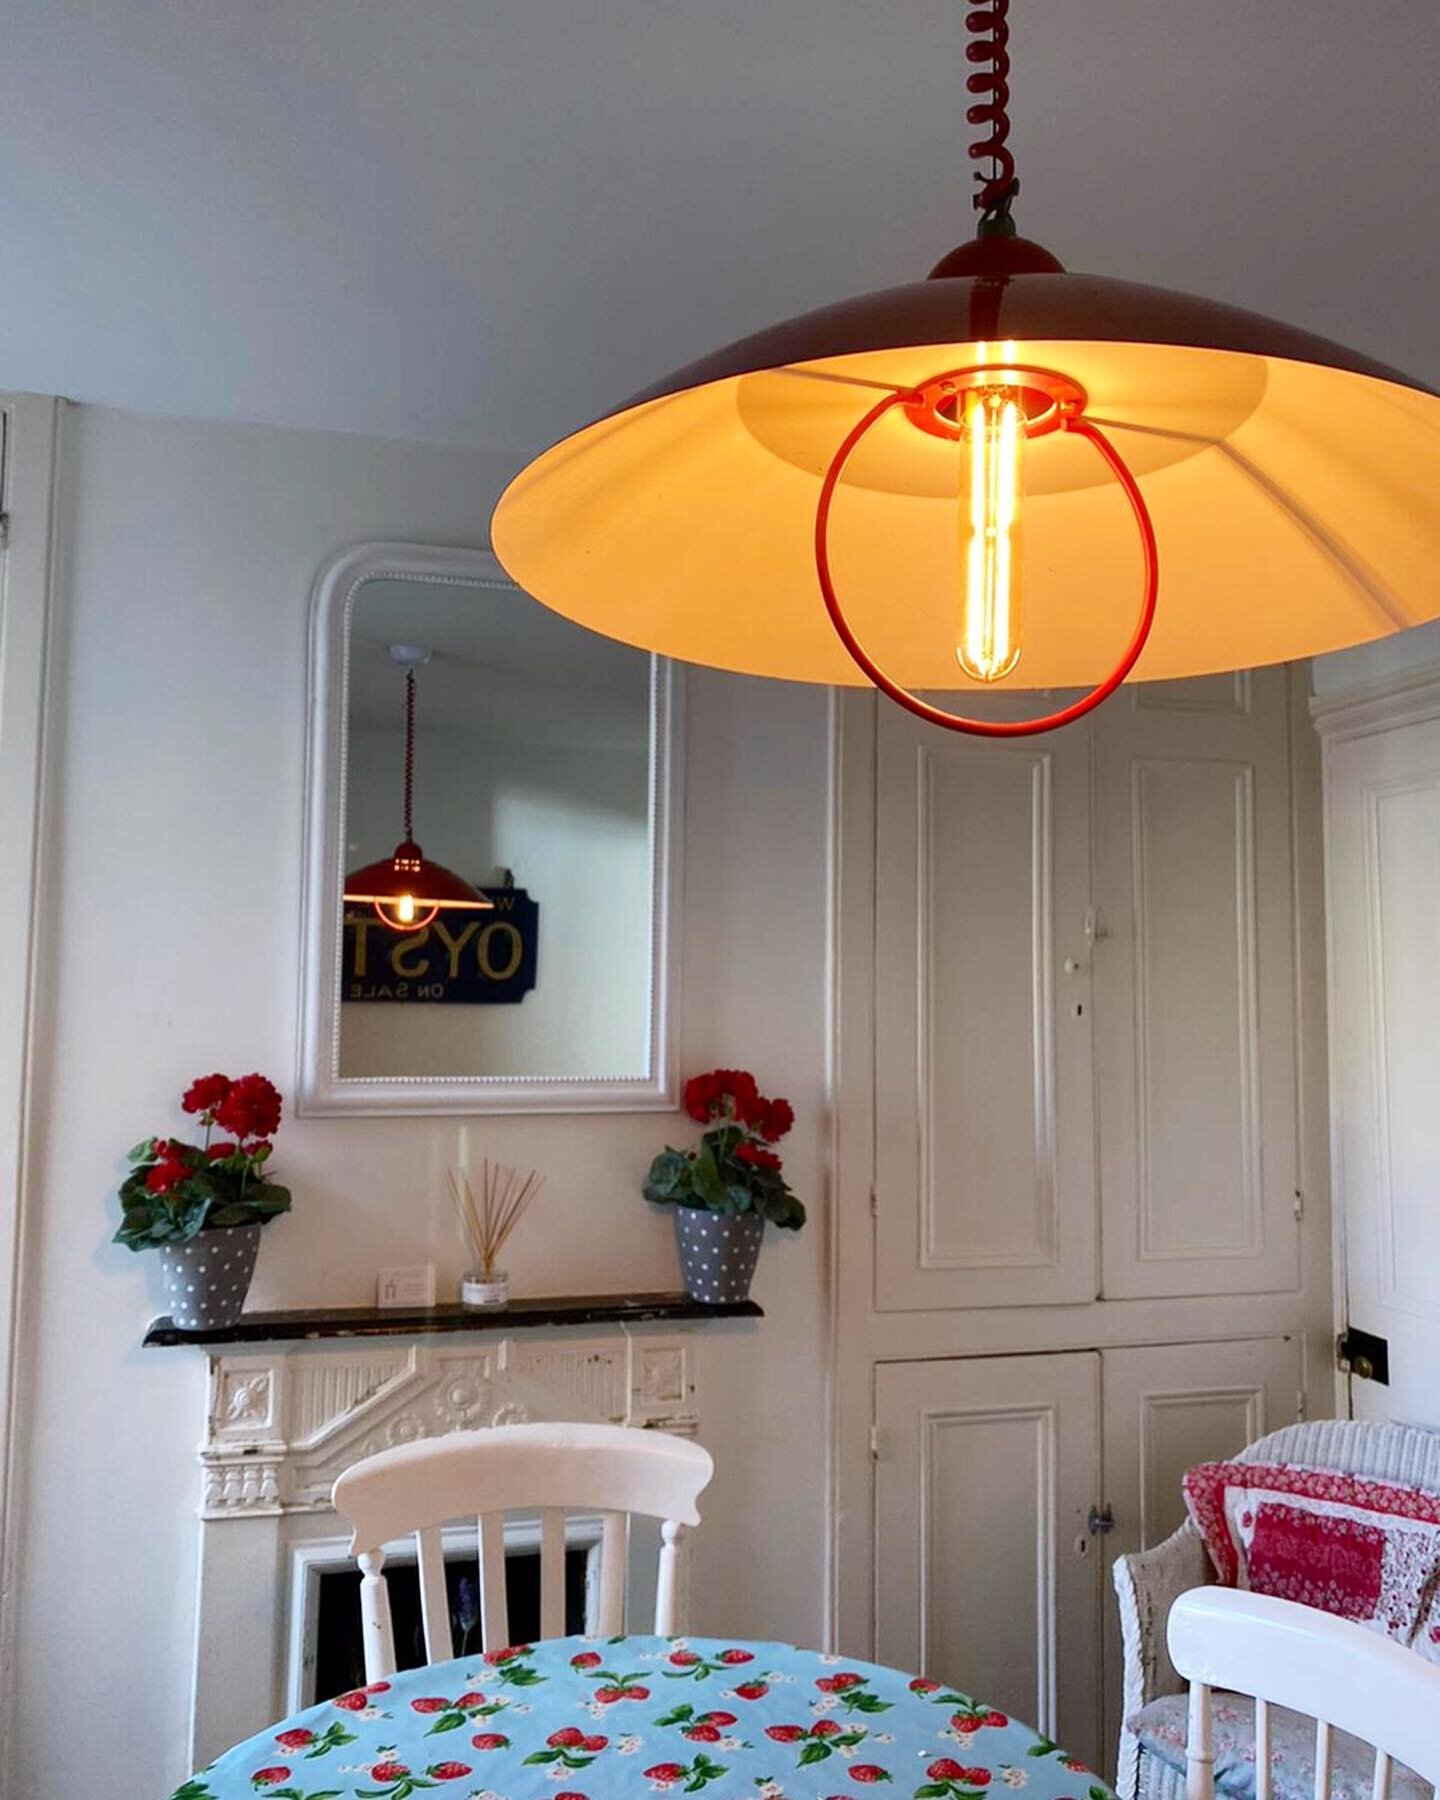 We are not all about &lsquo;newness&rsquo; here at @duma. 
Sometimes there&rsquo;s nothing better than saving a once loved light from the bin. Look at this finished 1960&rsquo;s rise and fall that neither &lsquo;rose&rsquo; nor &lsquo;fell&rsquo; or 